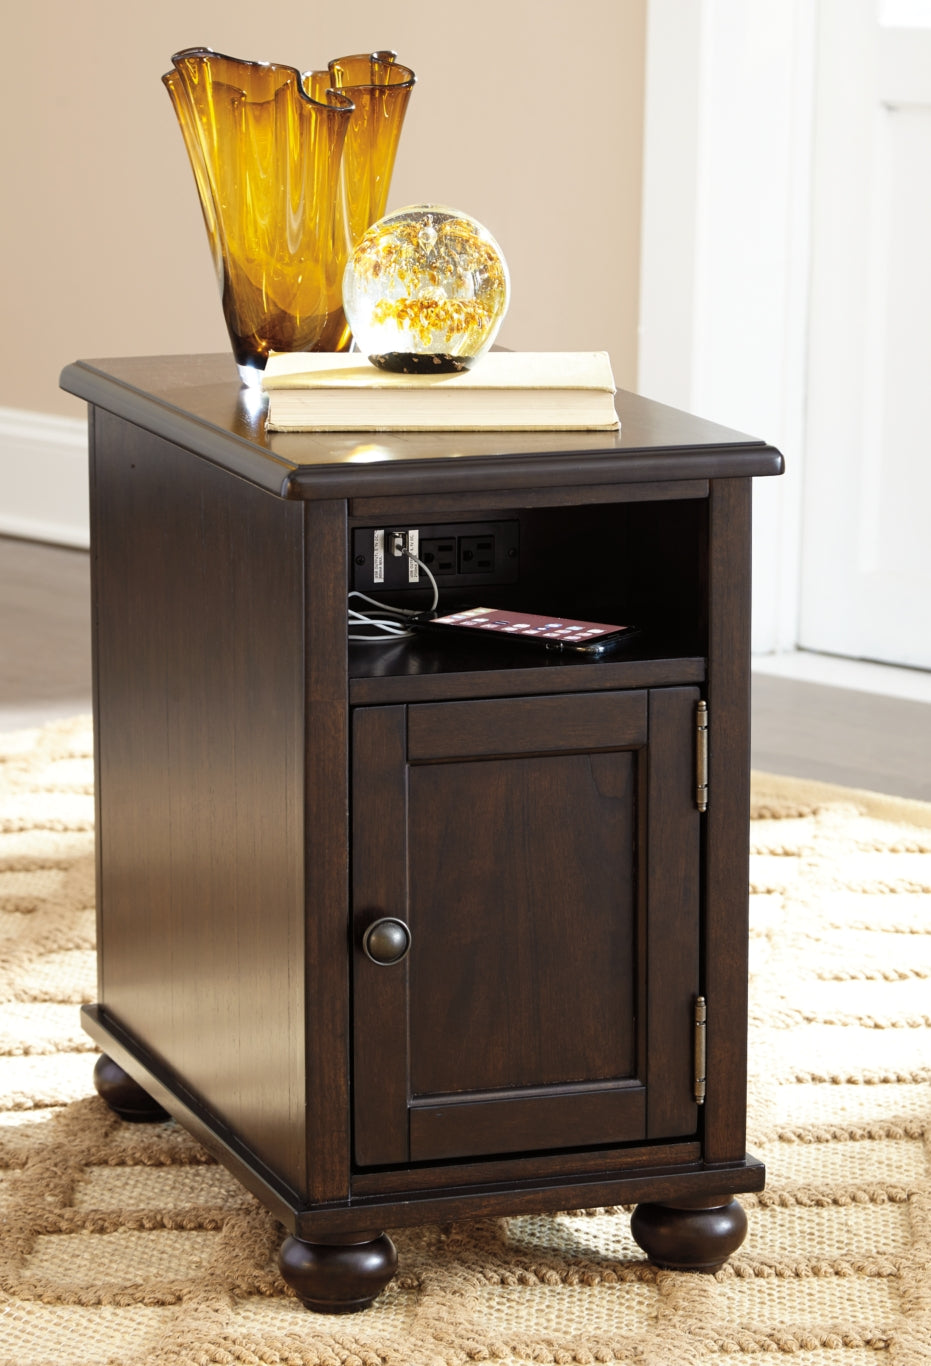 Barilanni Chairside End Table with USB Ports & Outlets - The Bargain Furniture